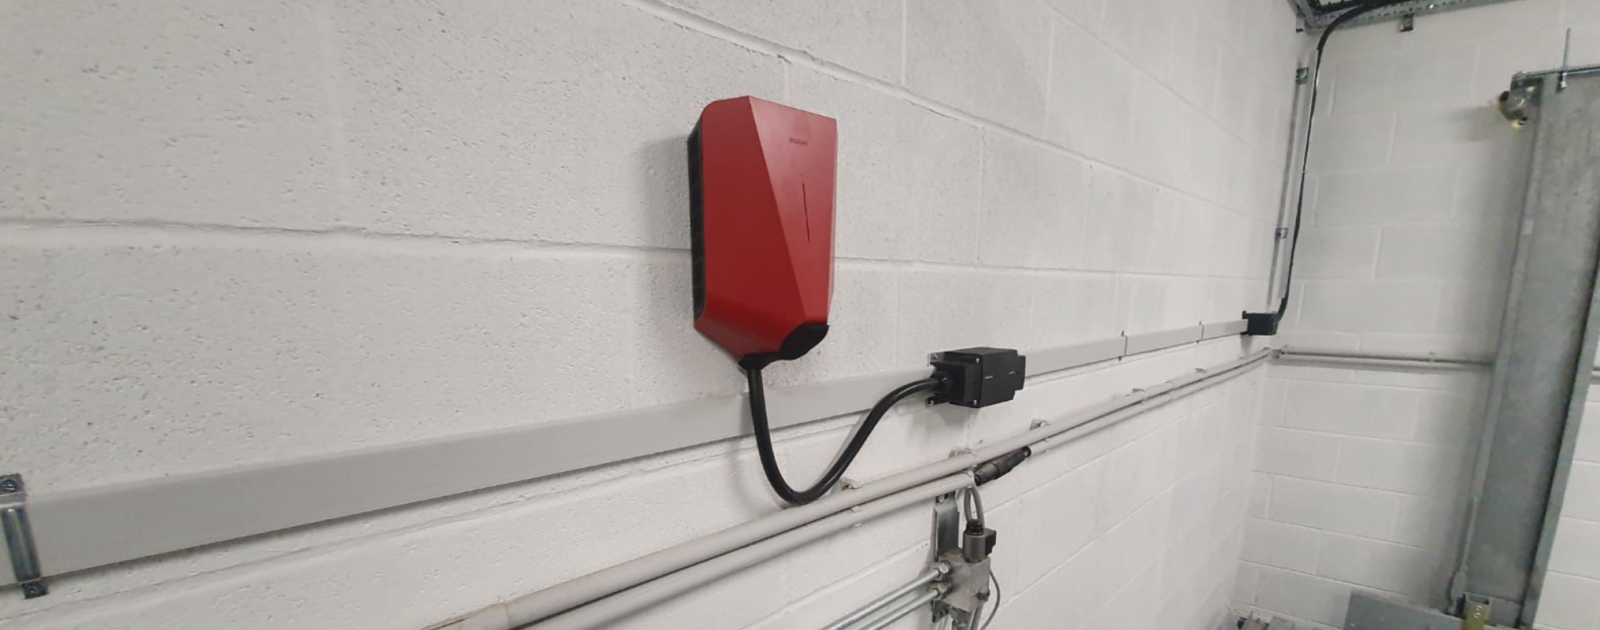 iDACS EV Charging Solutions for Landlords Property Developers and apartment residents